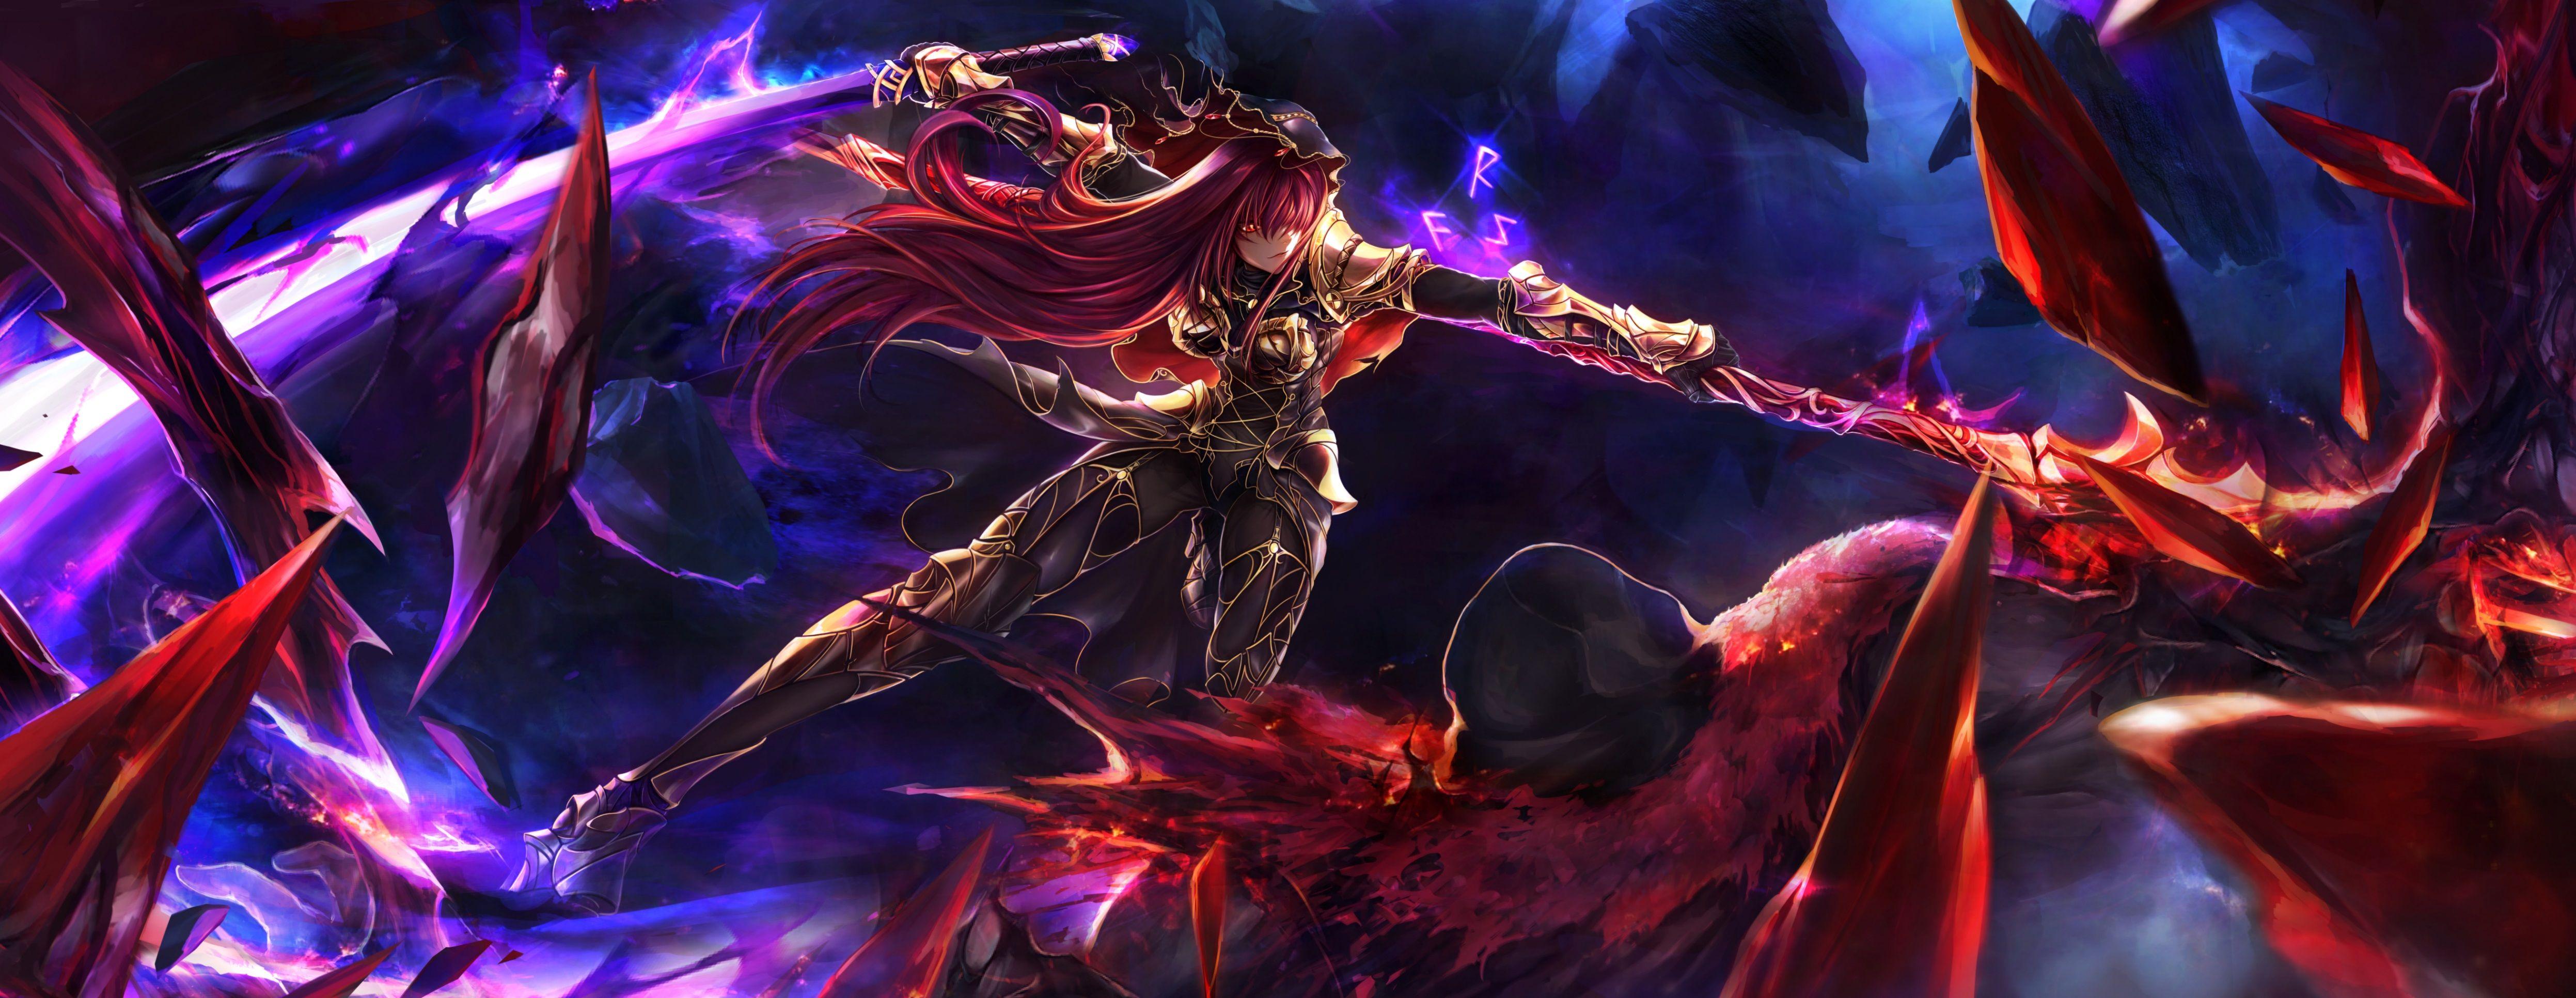 scathach fate download free